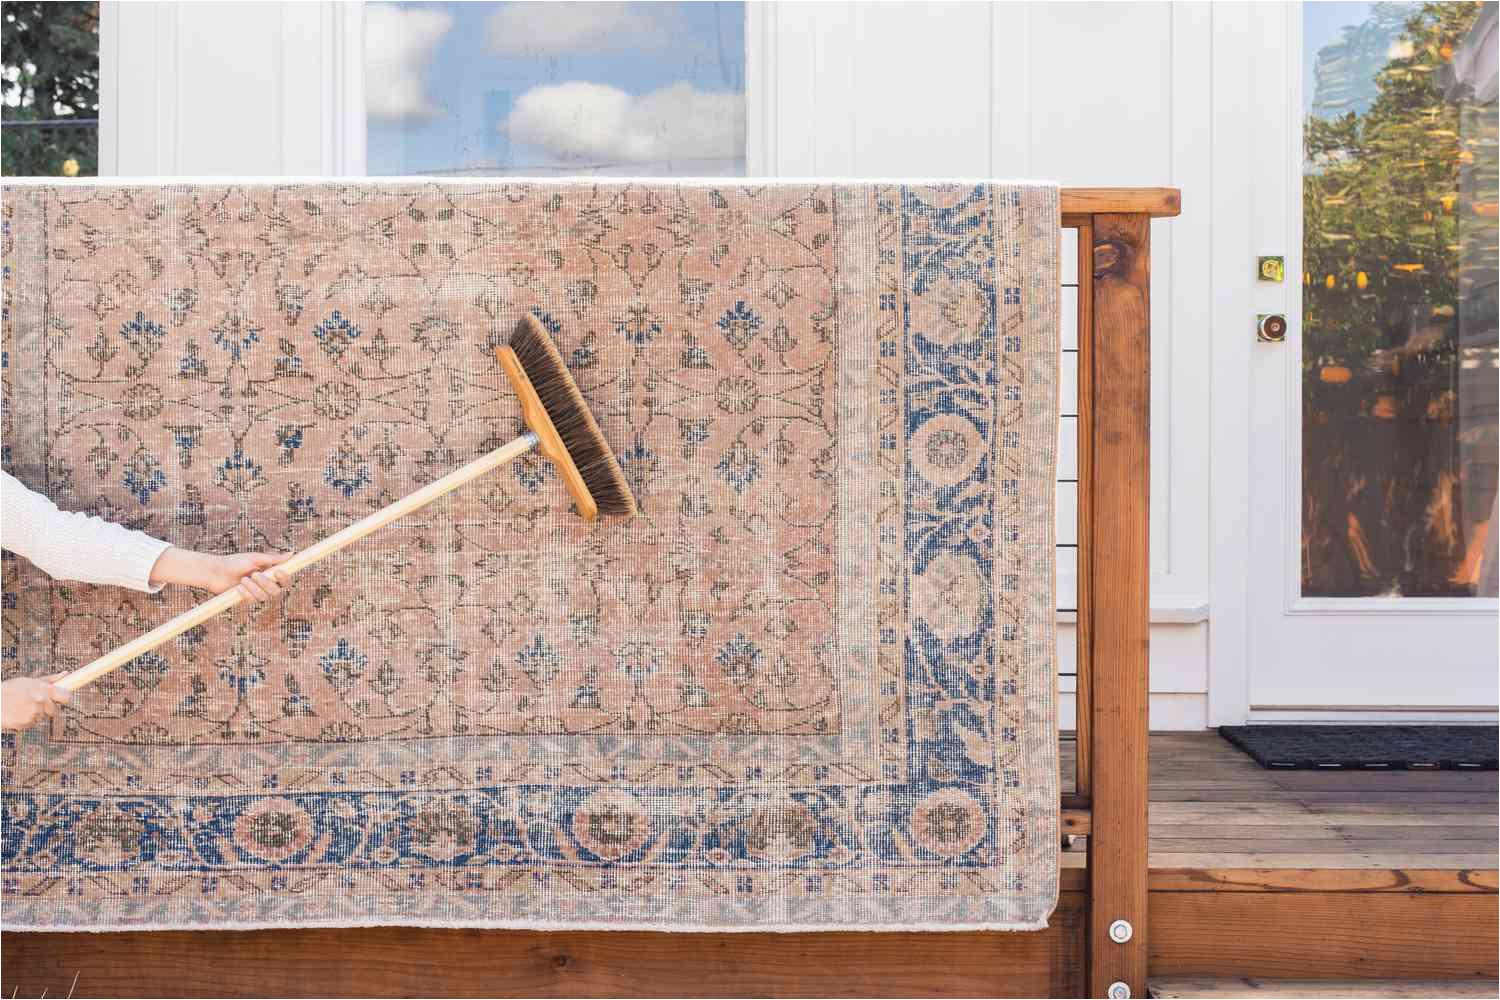 Professional Cleaning Wool area Rugs How to Clean A Wool Rug with Household Items